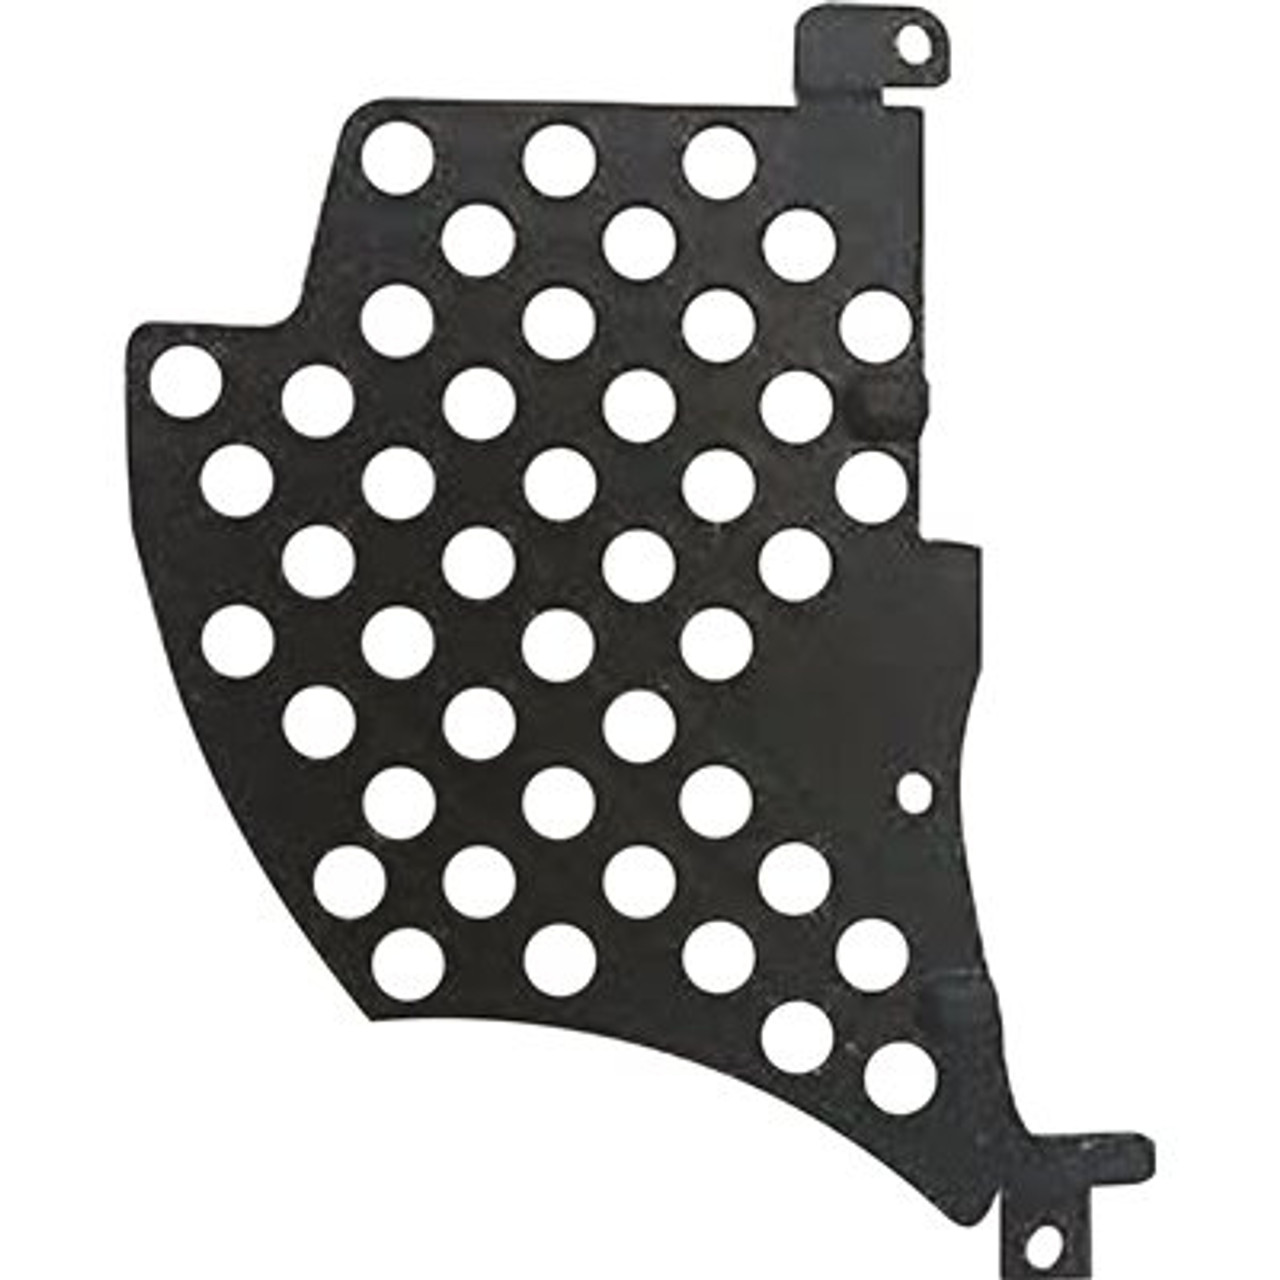 FRIGIDAIRE Replacement Cover Plate For Dishwasher, Part# 807111601